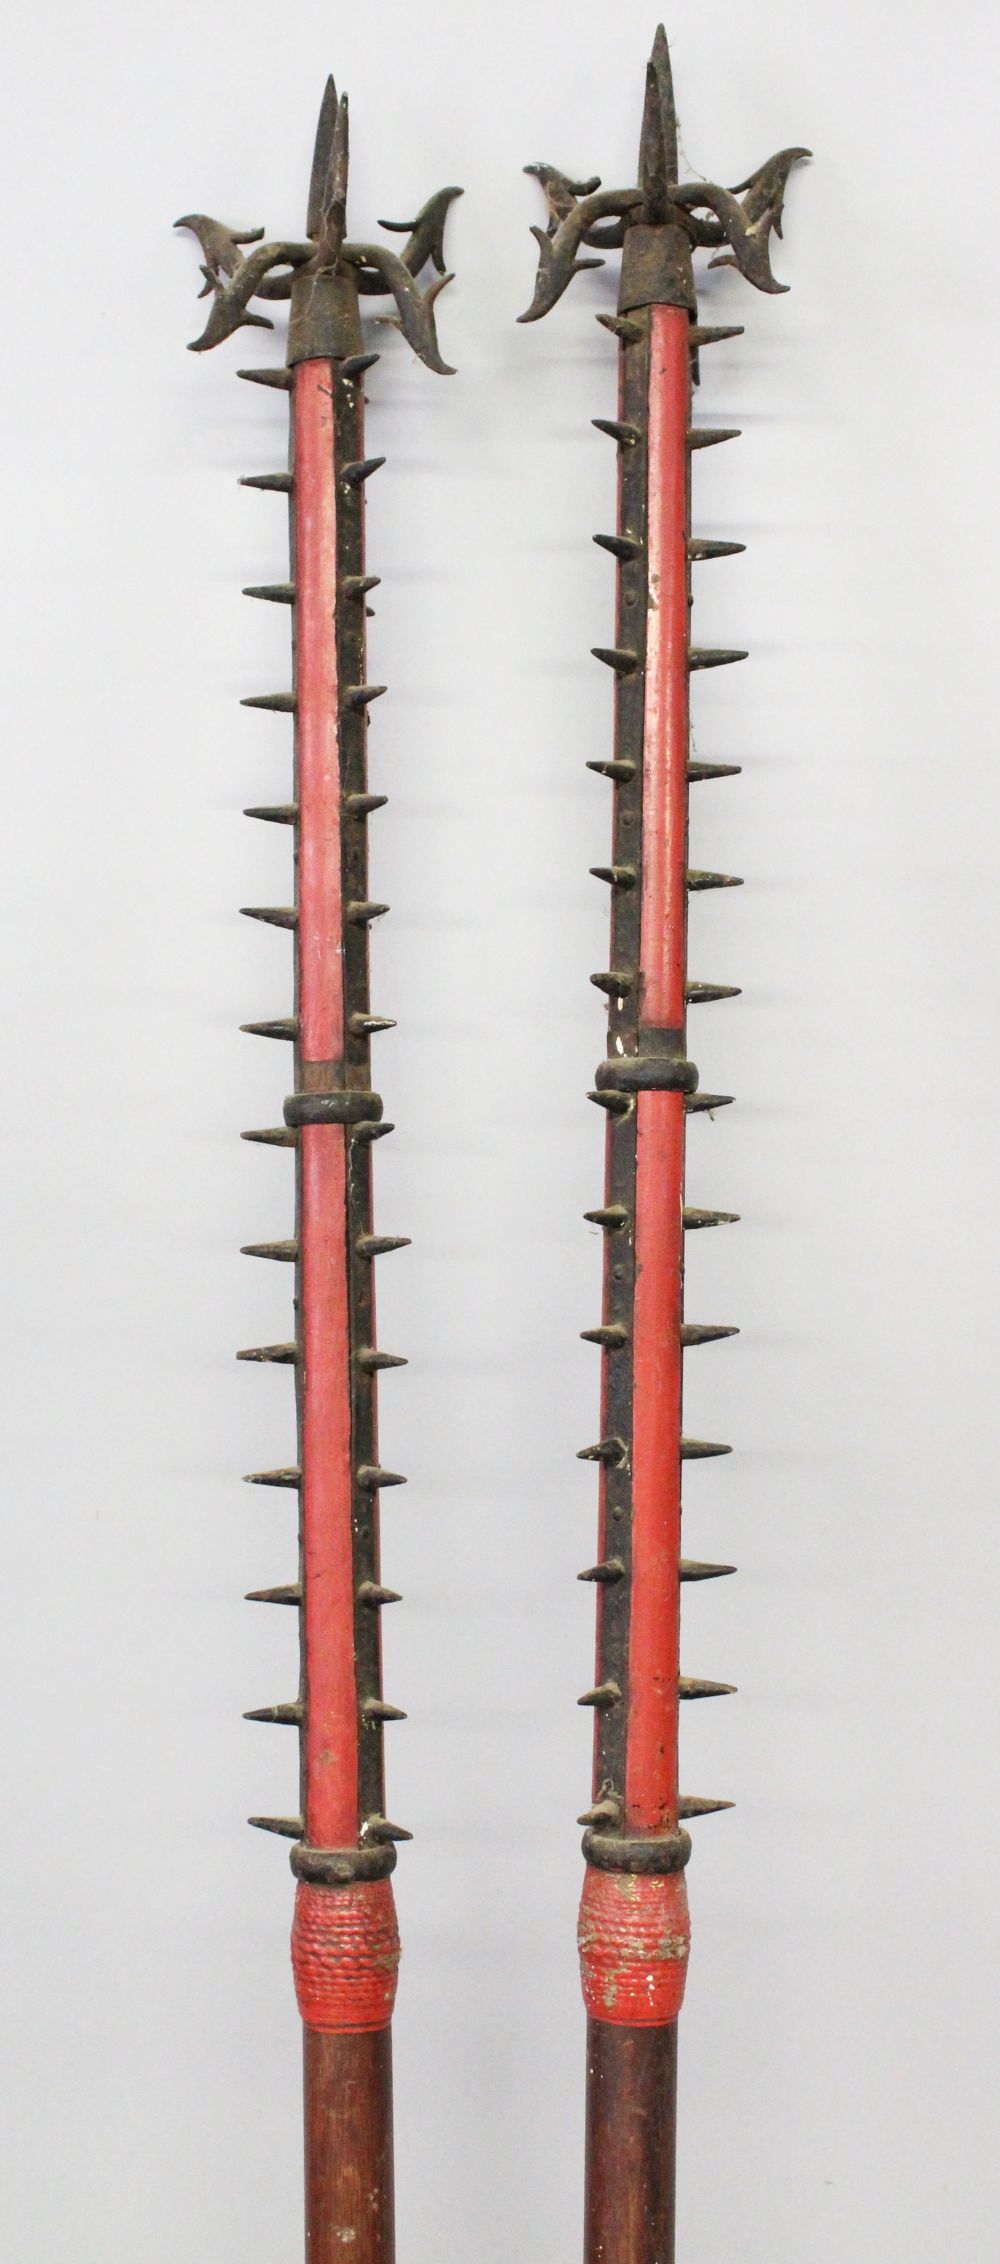 A GOOD PAIR OF ORIENTAL POLE ARMS, the tops with spikes and hooks, the collar formed from carved